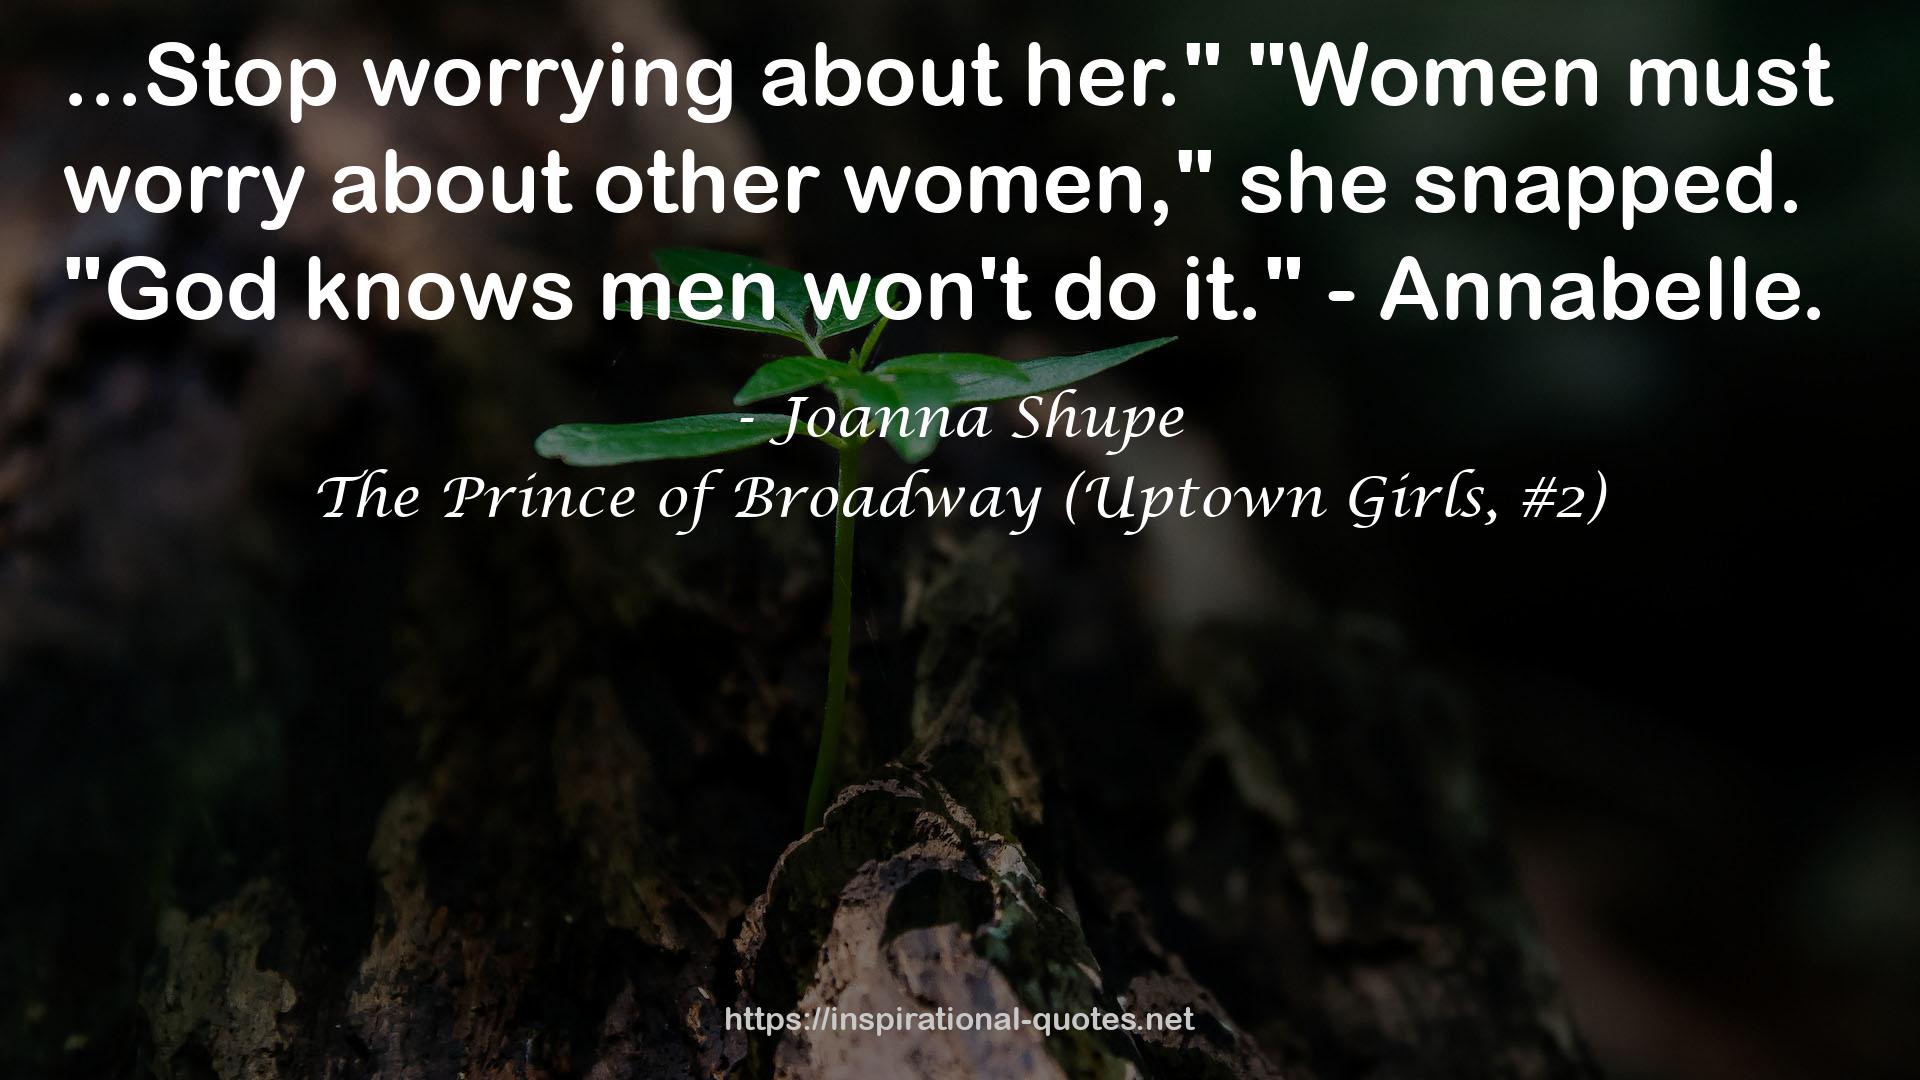 The Prince of Broadway (Uptown Girls, #2) QUOTES